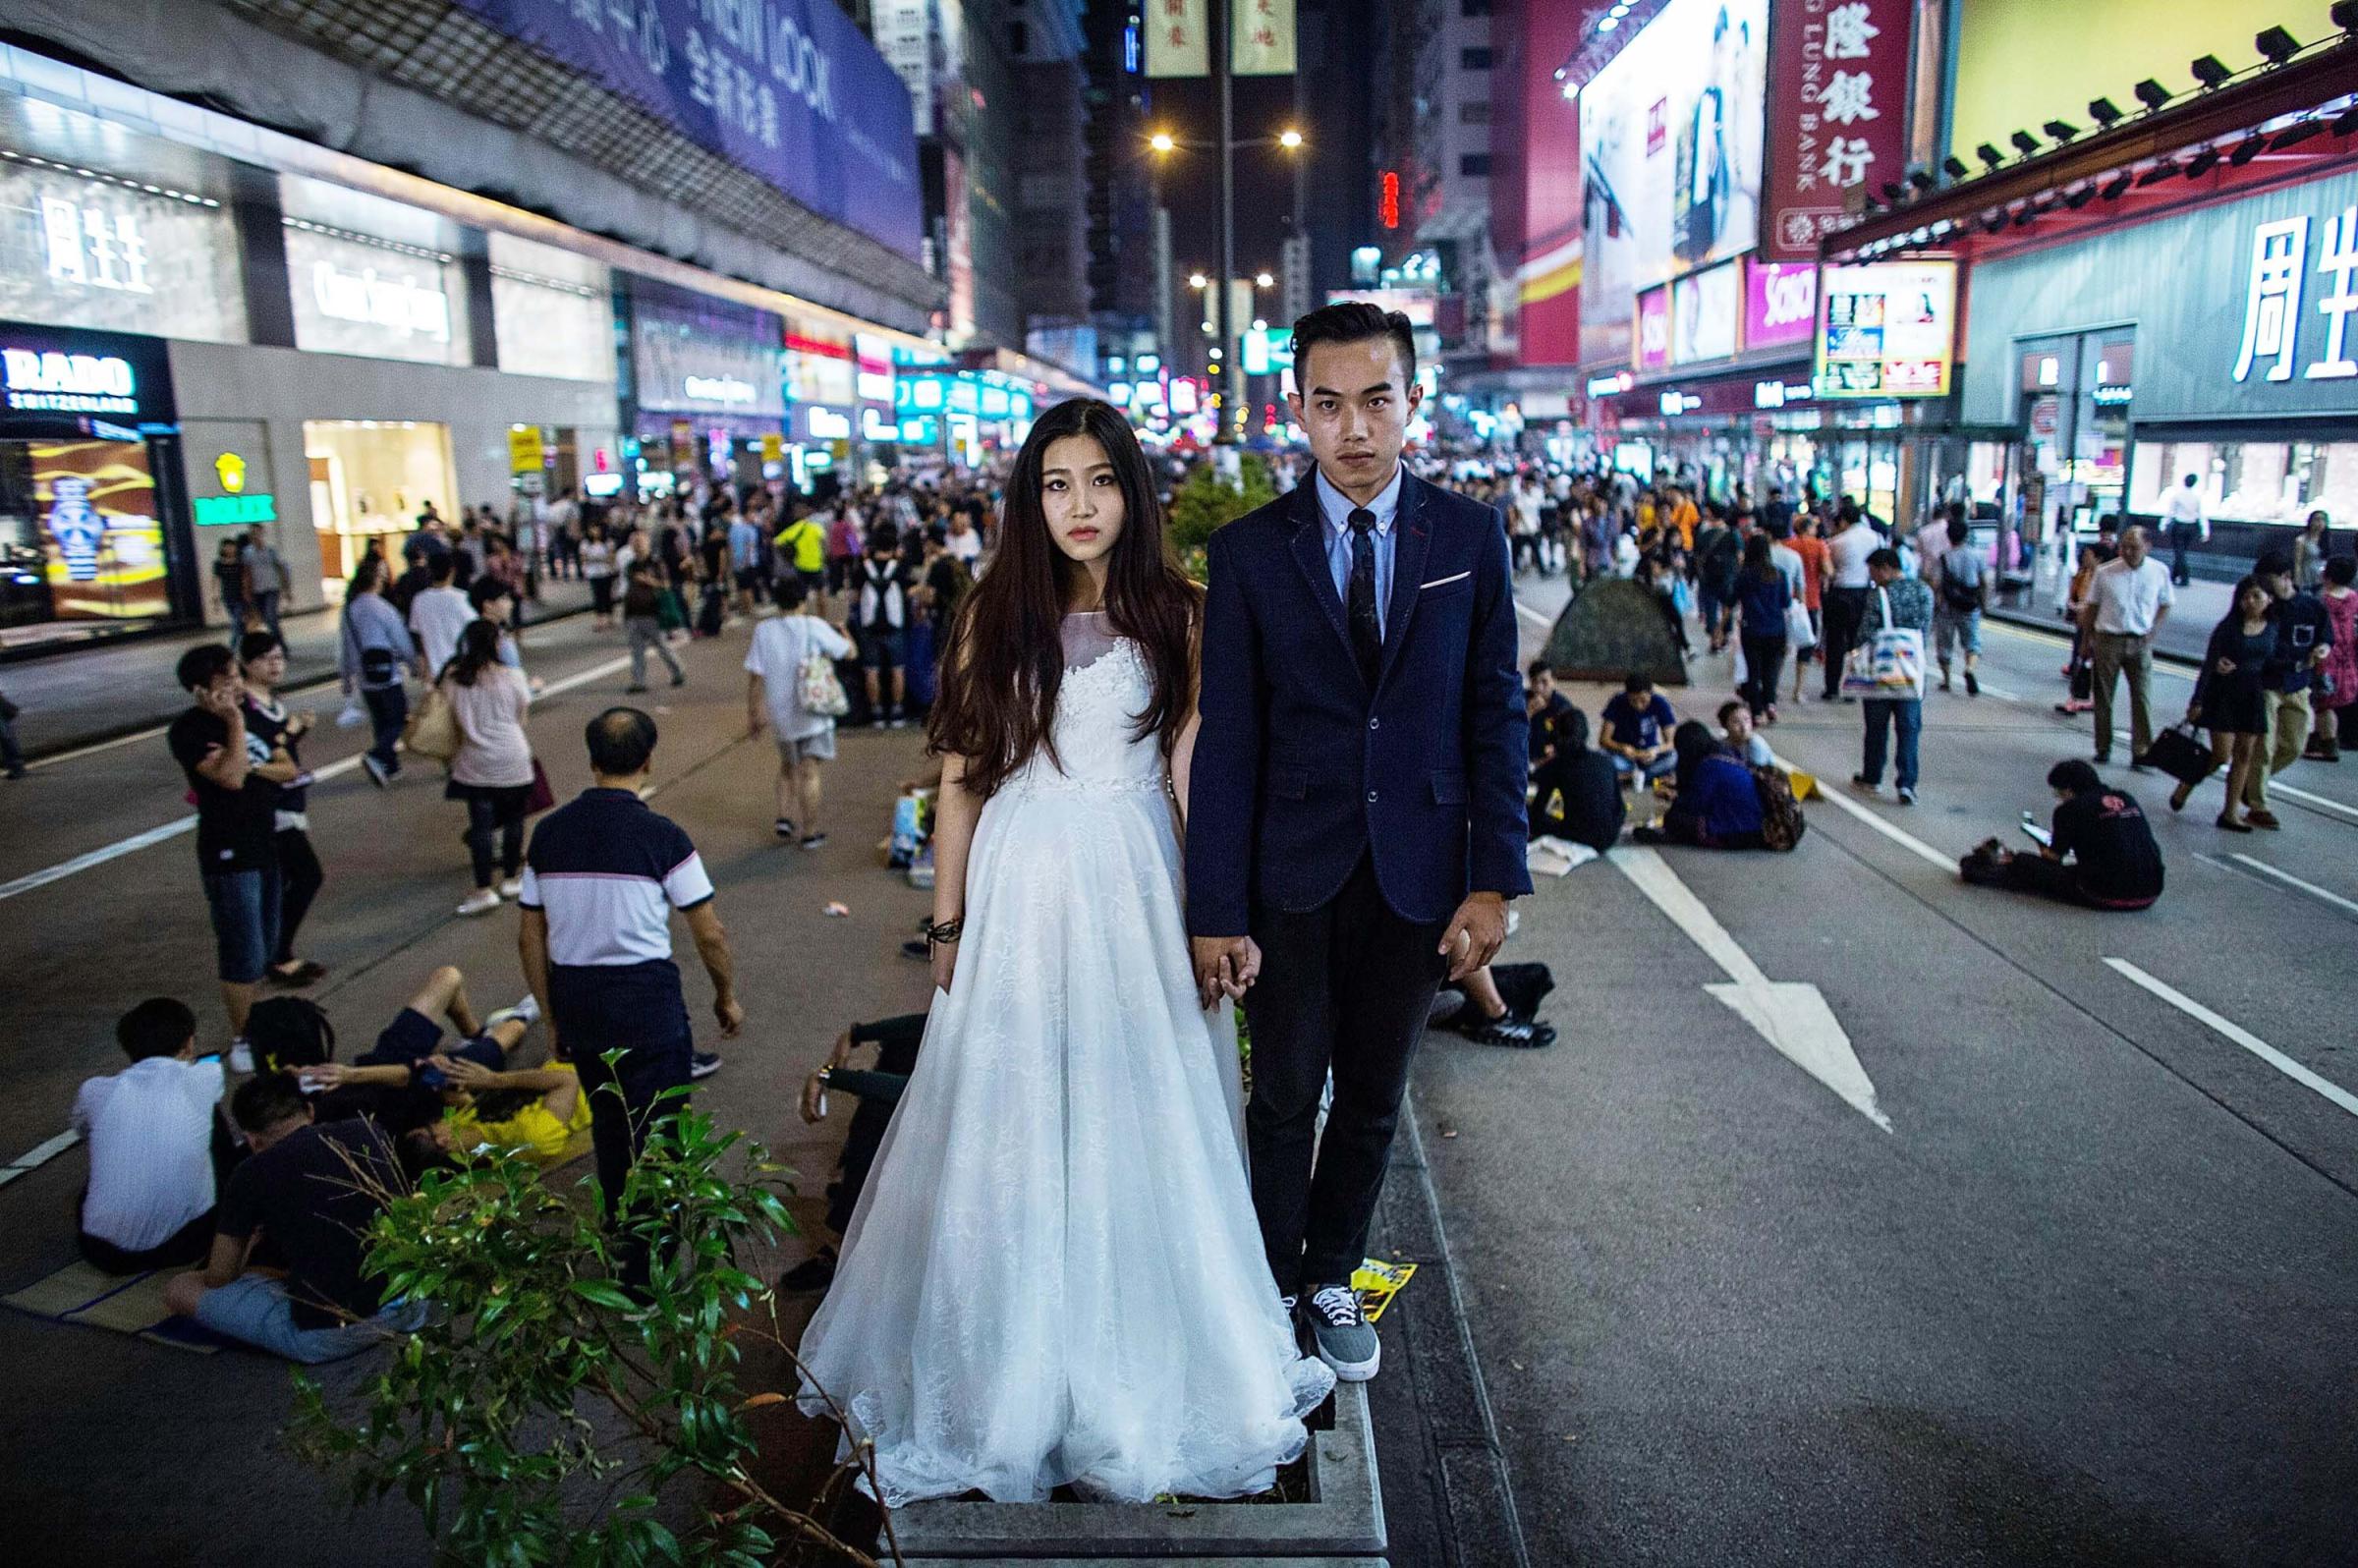 A Chinese couple takes pre-wedding photos at the occupation zone at Mongkok on Oct. 21, 2014 in Hong Kong.